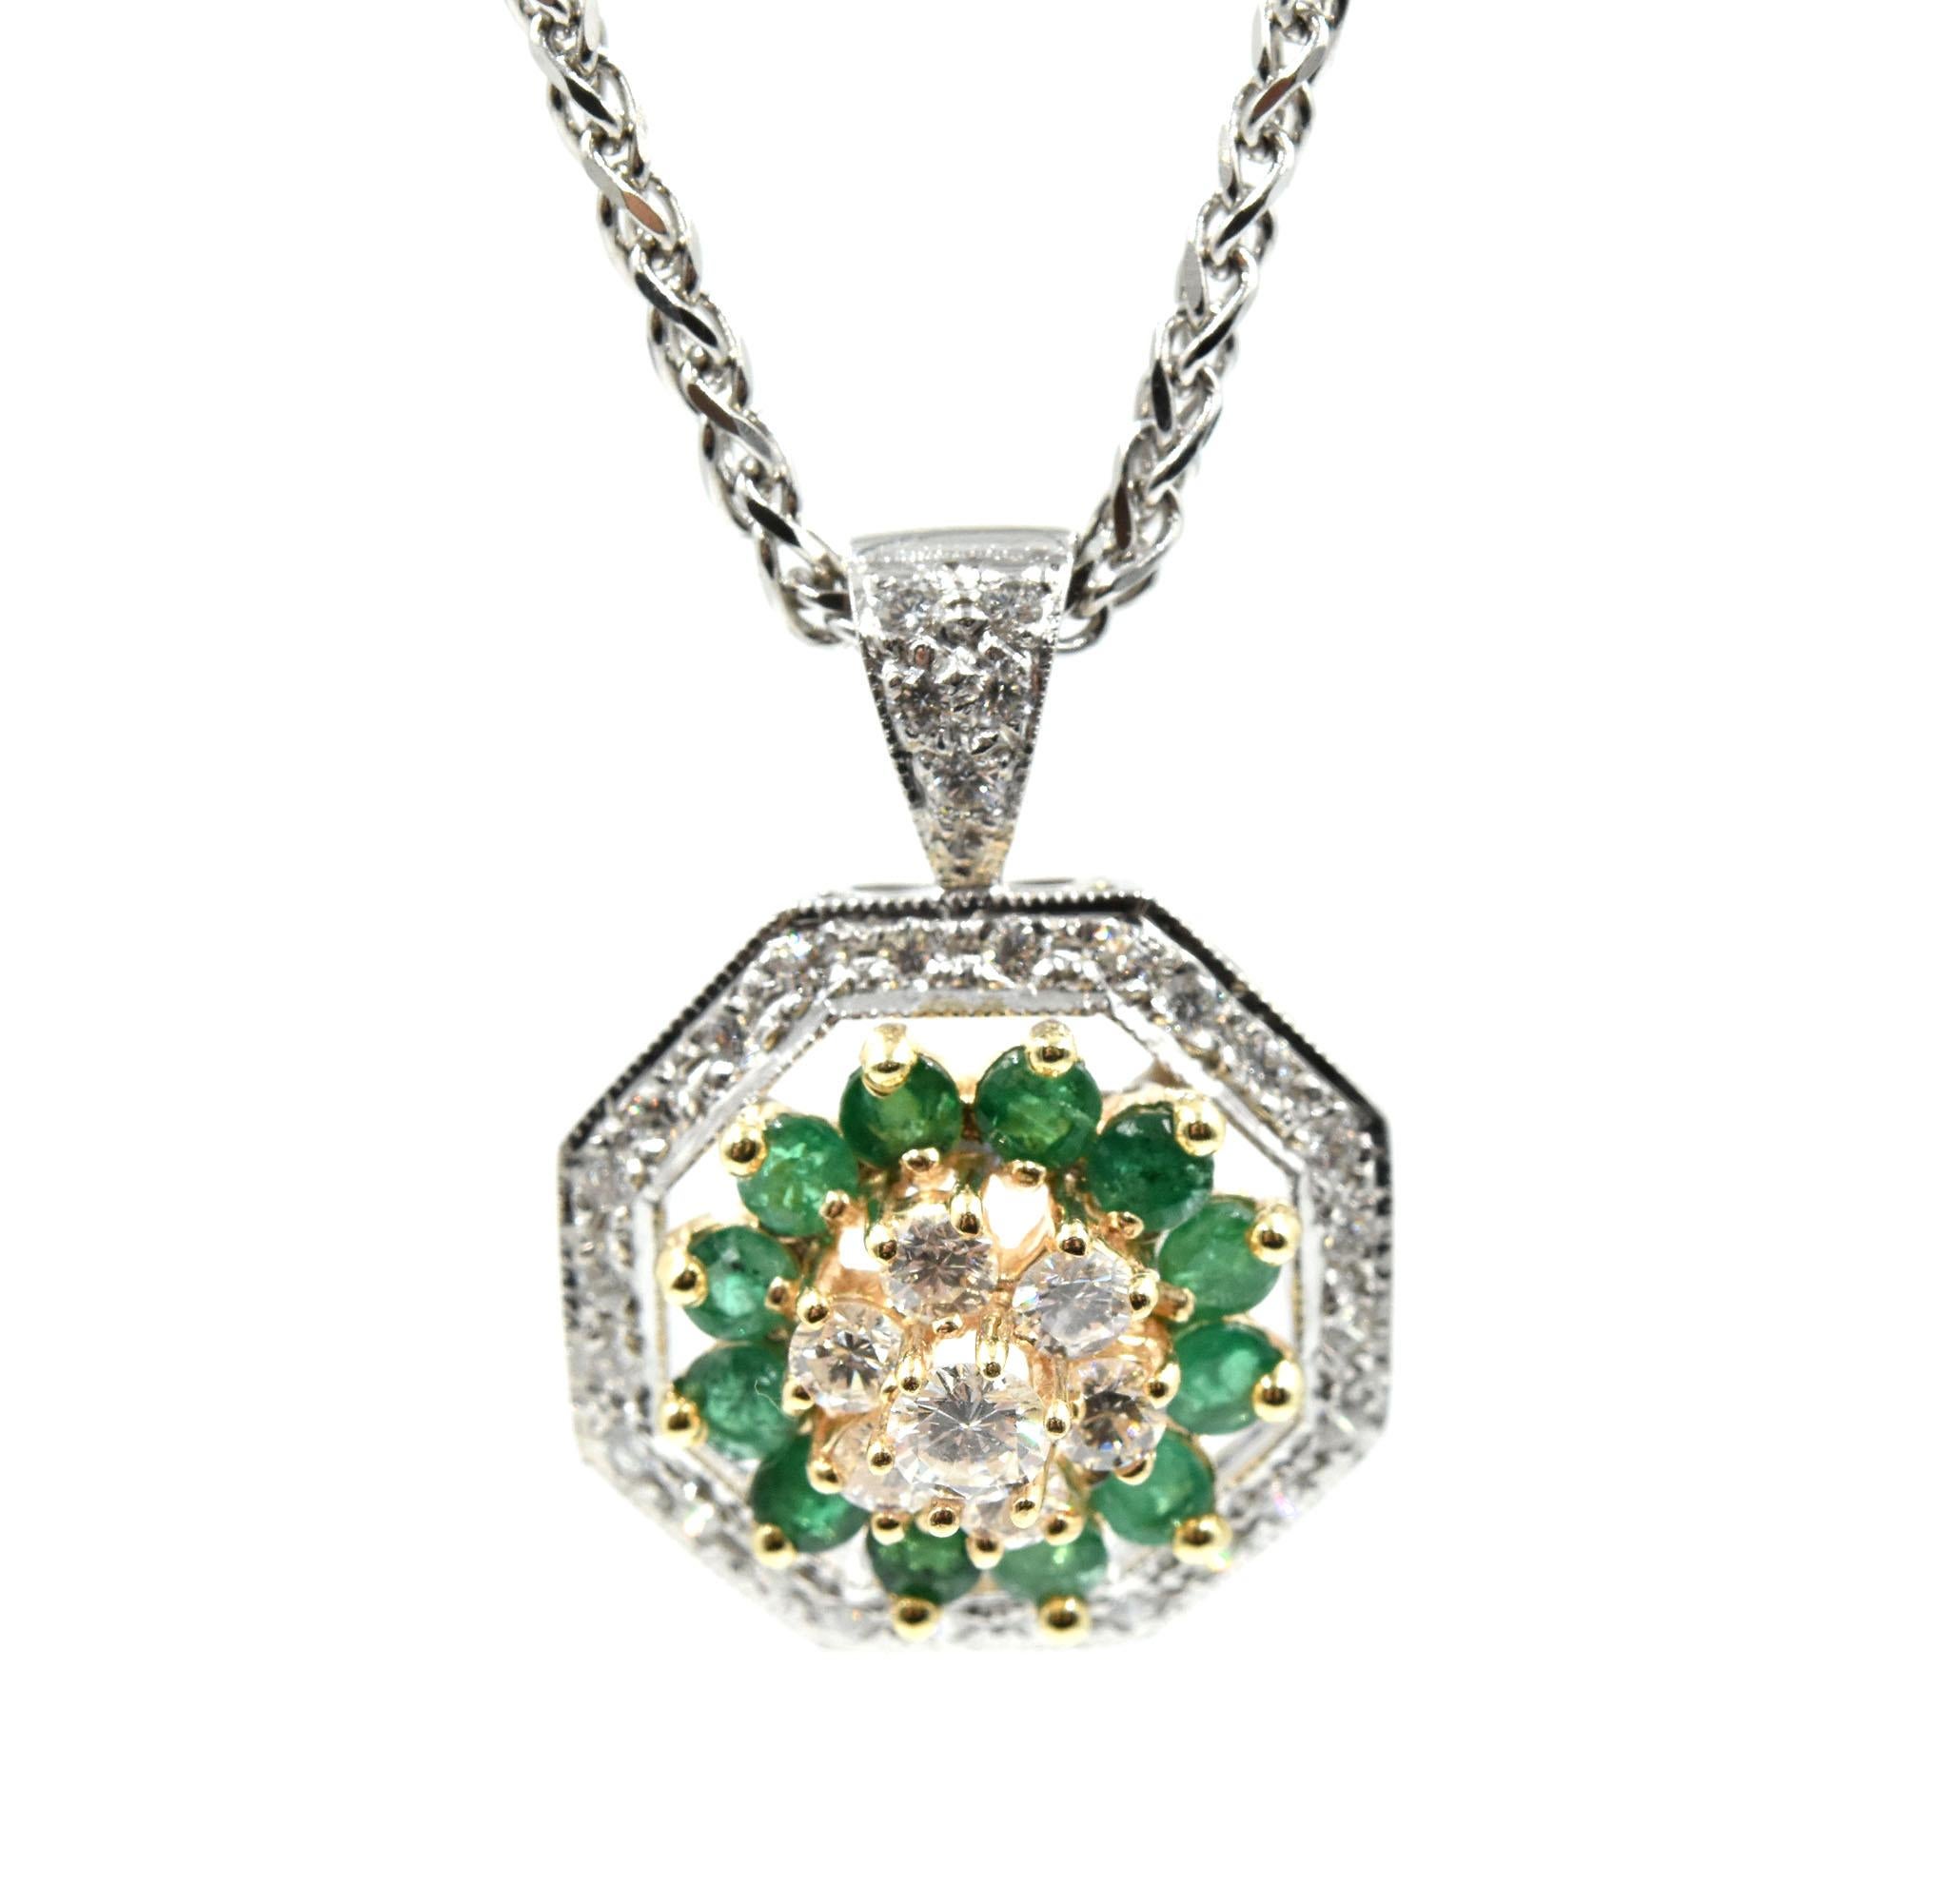 Vintage 14 Karat Yellow and White Gold Diamond and Emerald Pendant Necklace